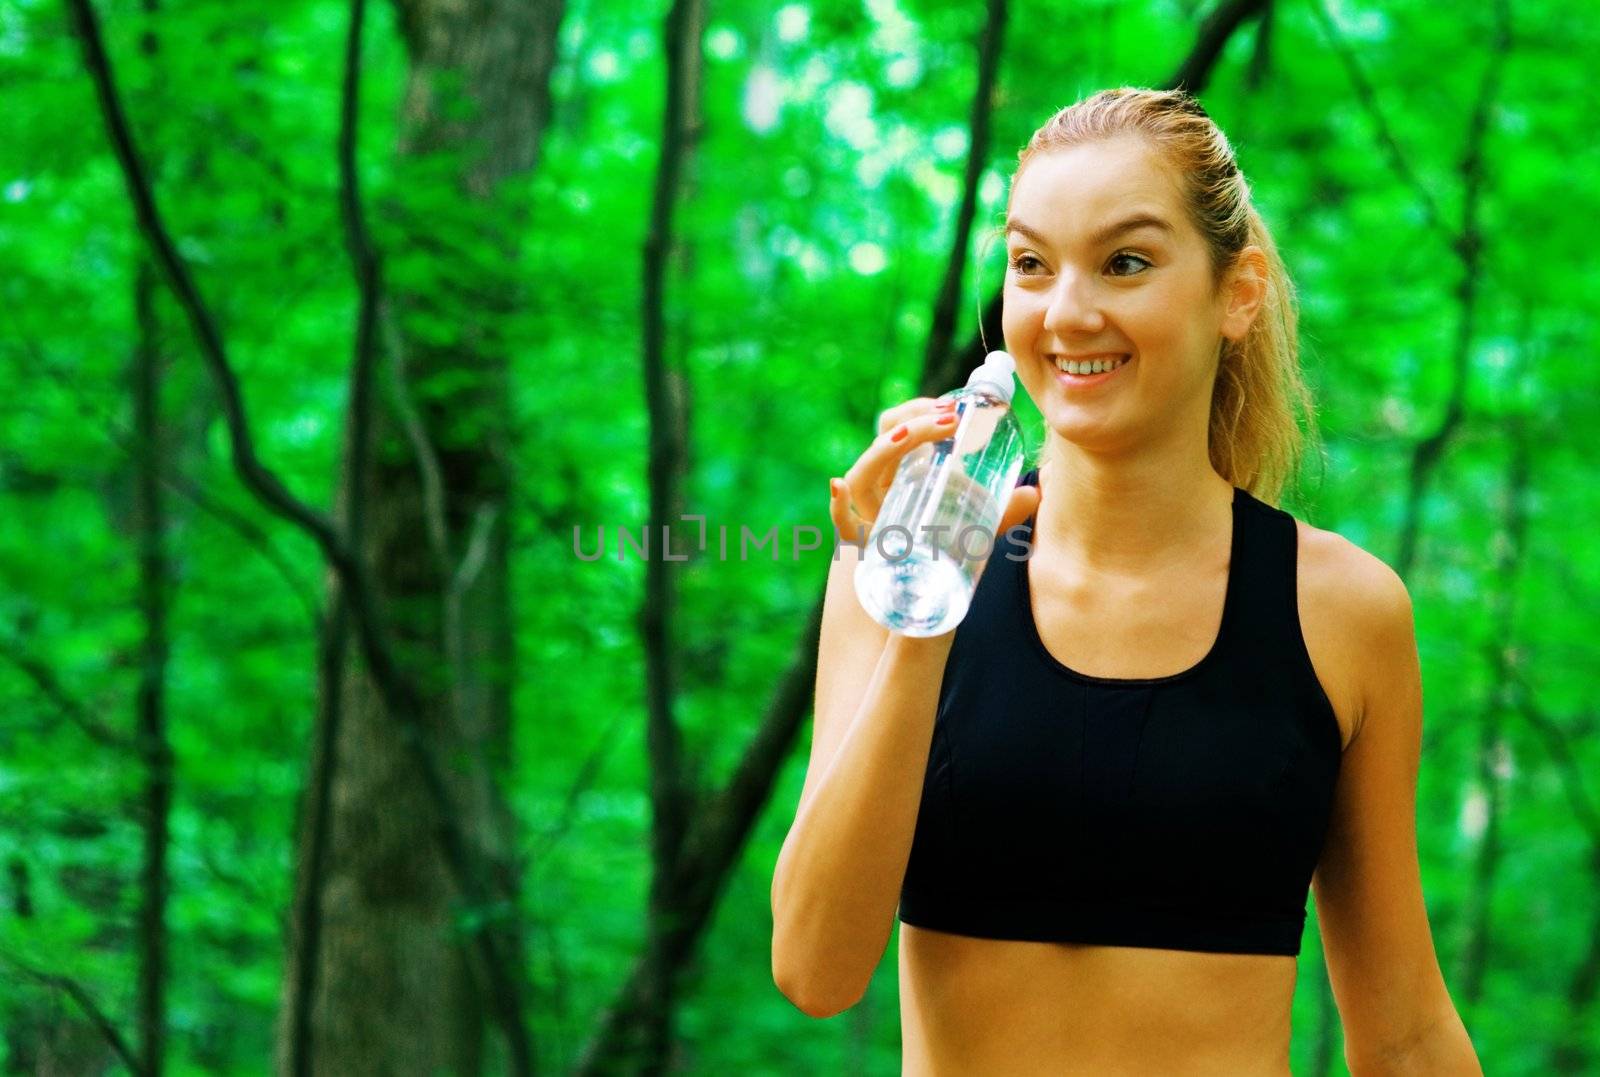 Blonde haired woman exercising, from a complete series of photos.